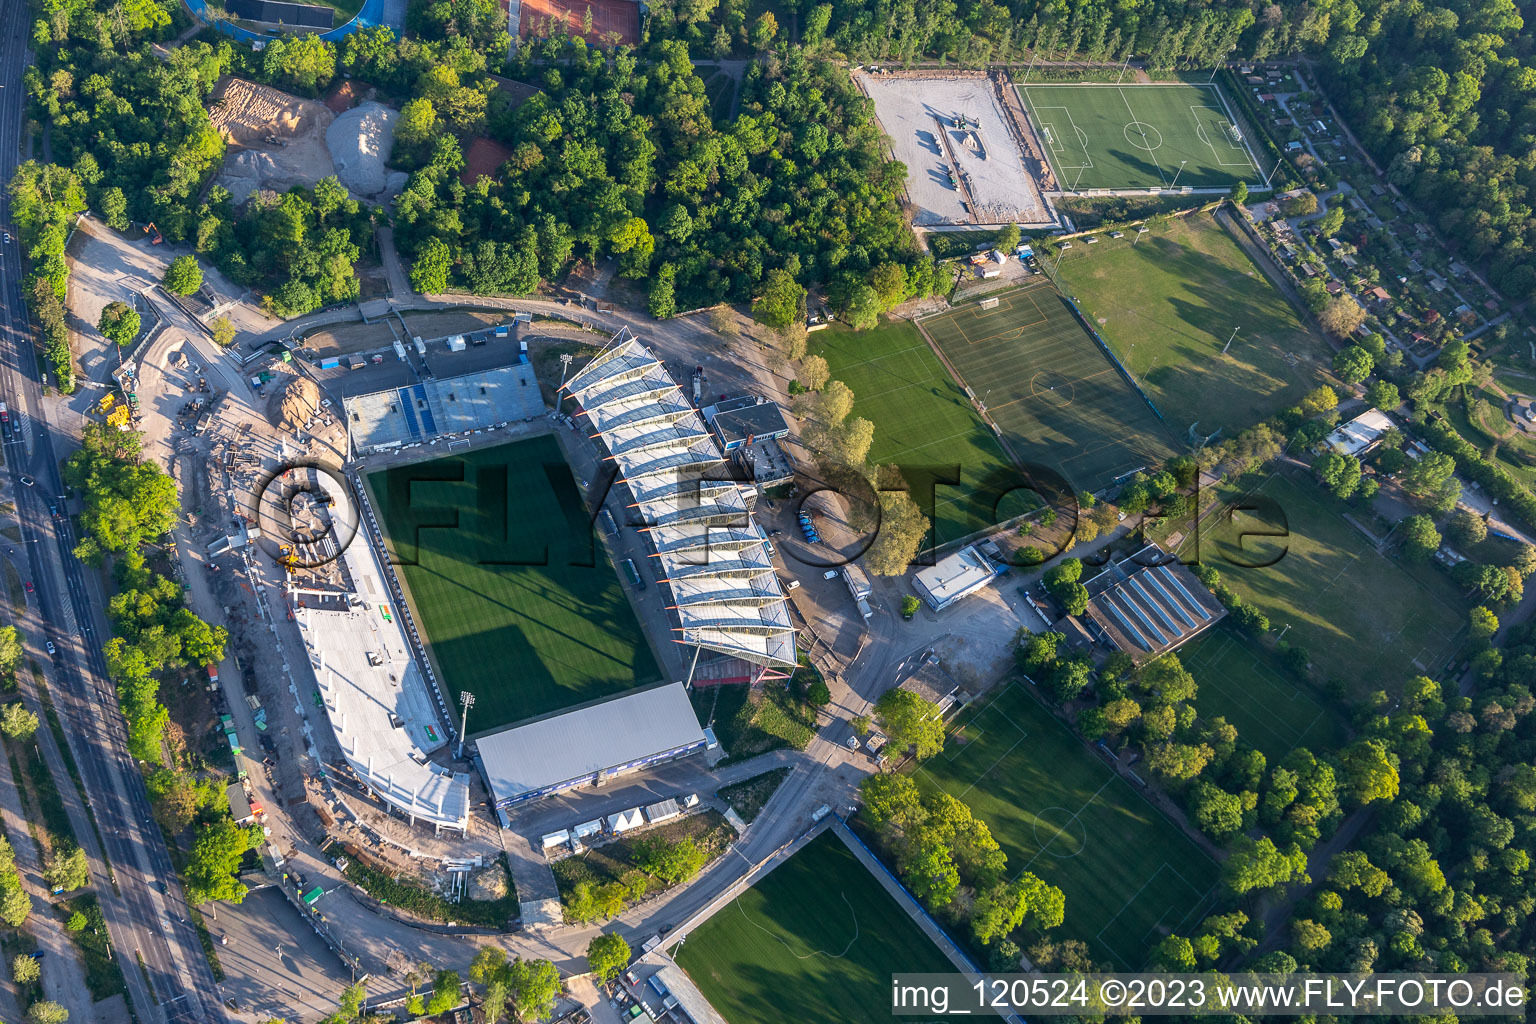 Extension and conversion site on the sports ground of the stadium " Wildparkstadion " in Karlsruhe in the state Baden-Wurttemberg, Germany from above